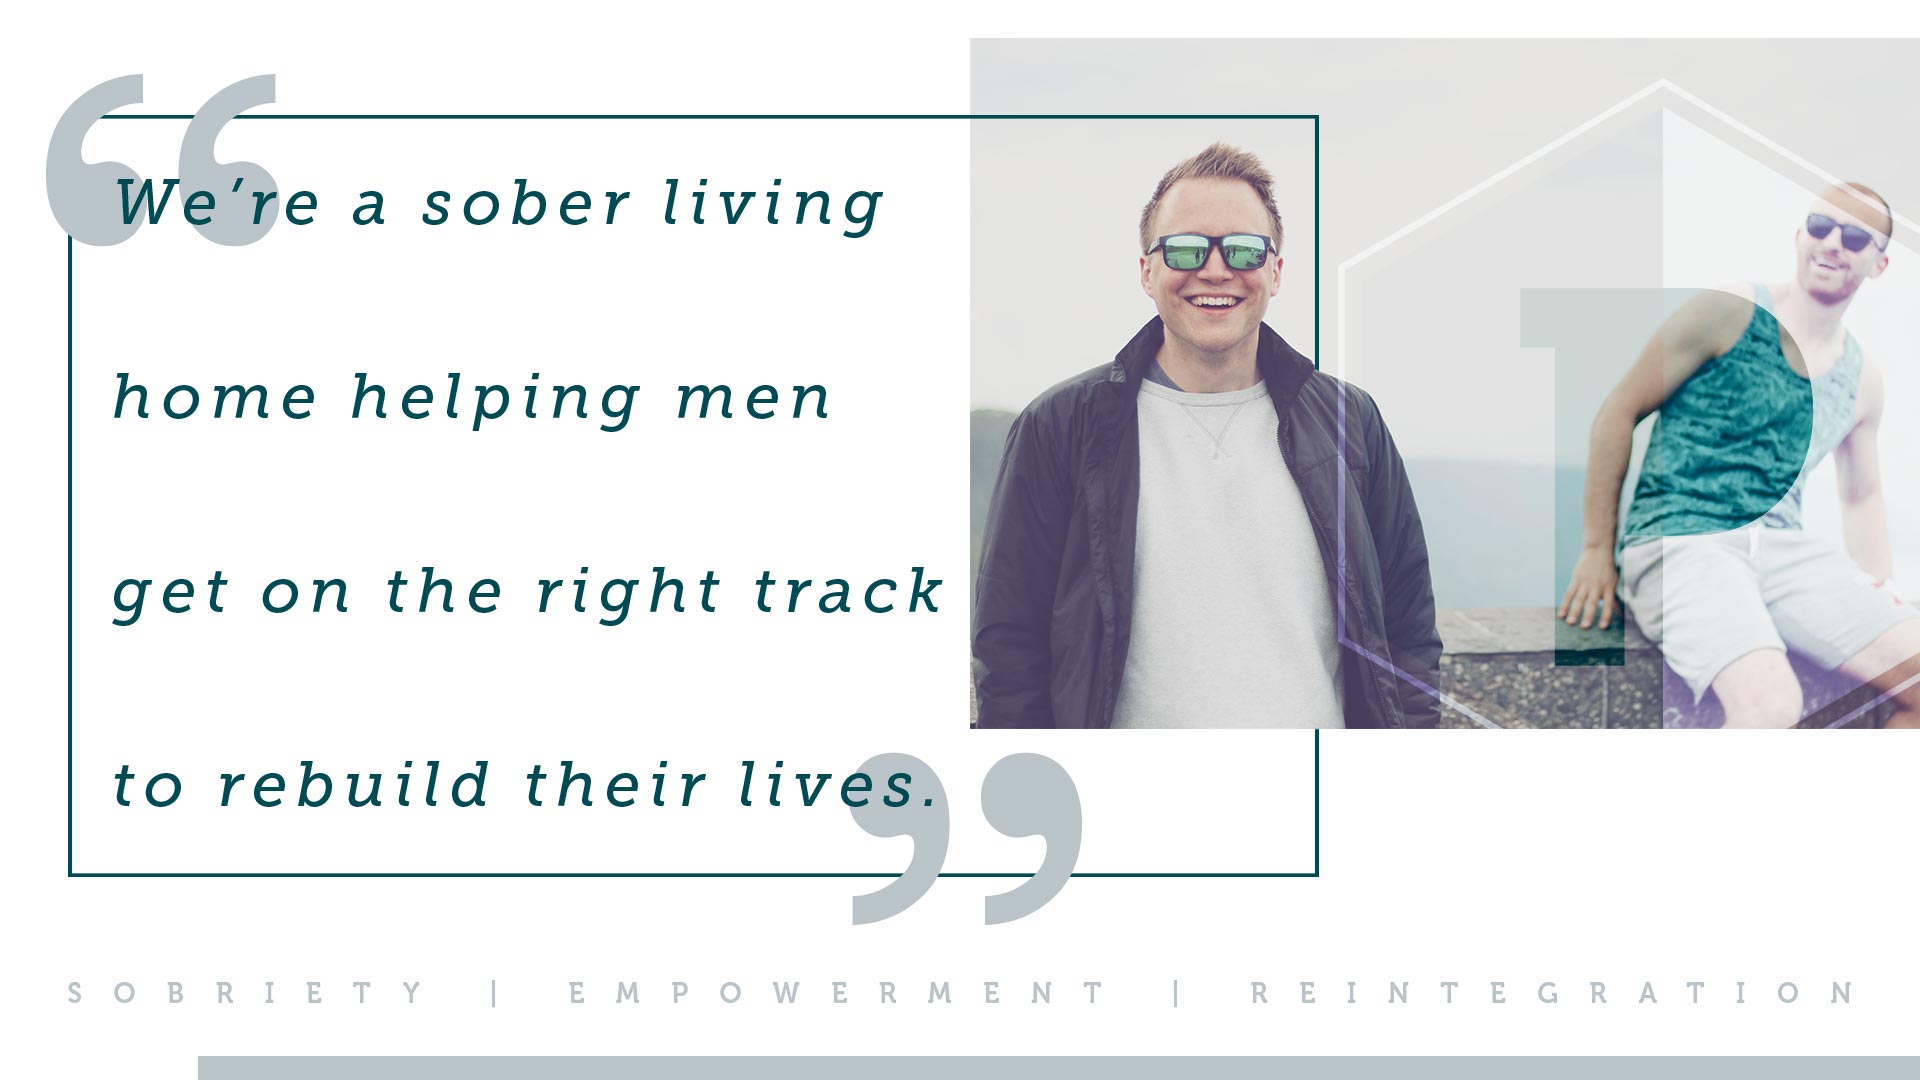 Prosperity Recovery Residence is a sober living home located in Wilmington Delaware, helping men get on the right track to rebuild their lives.